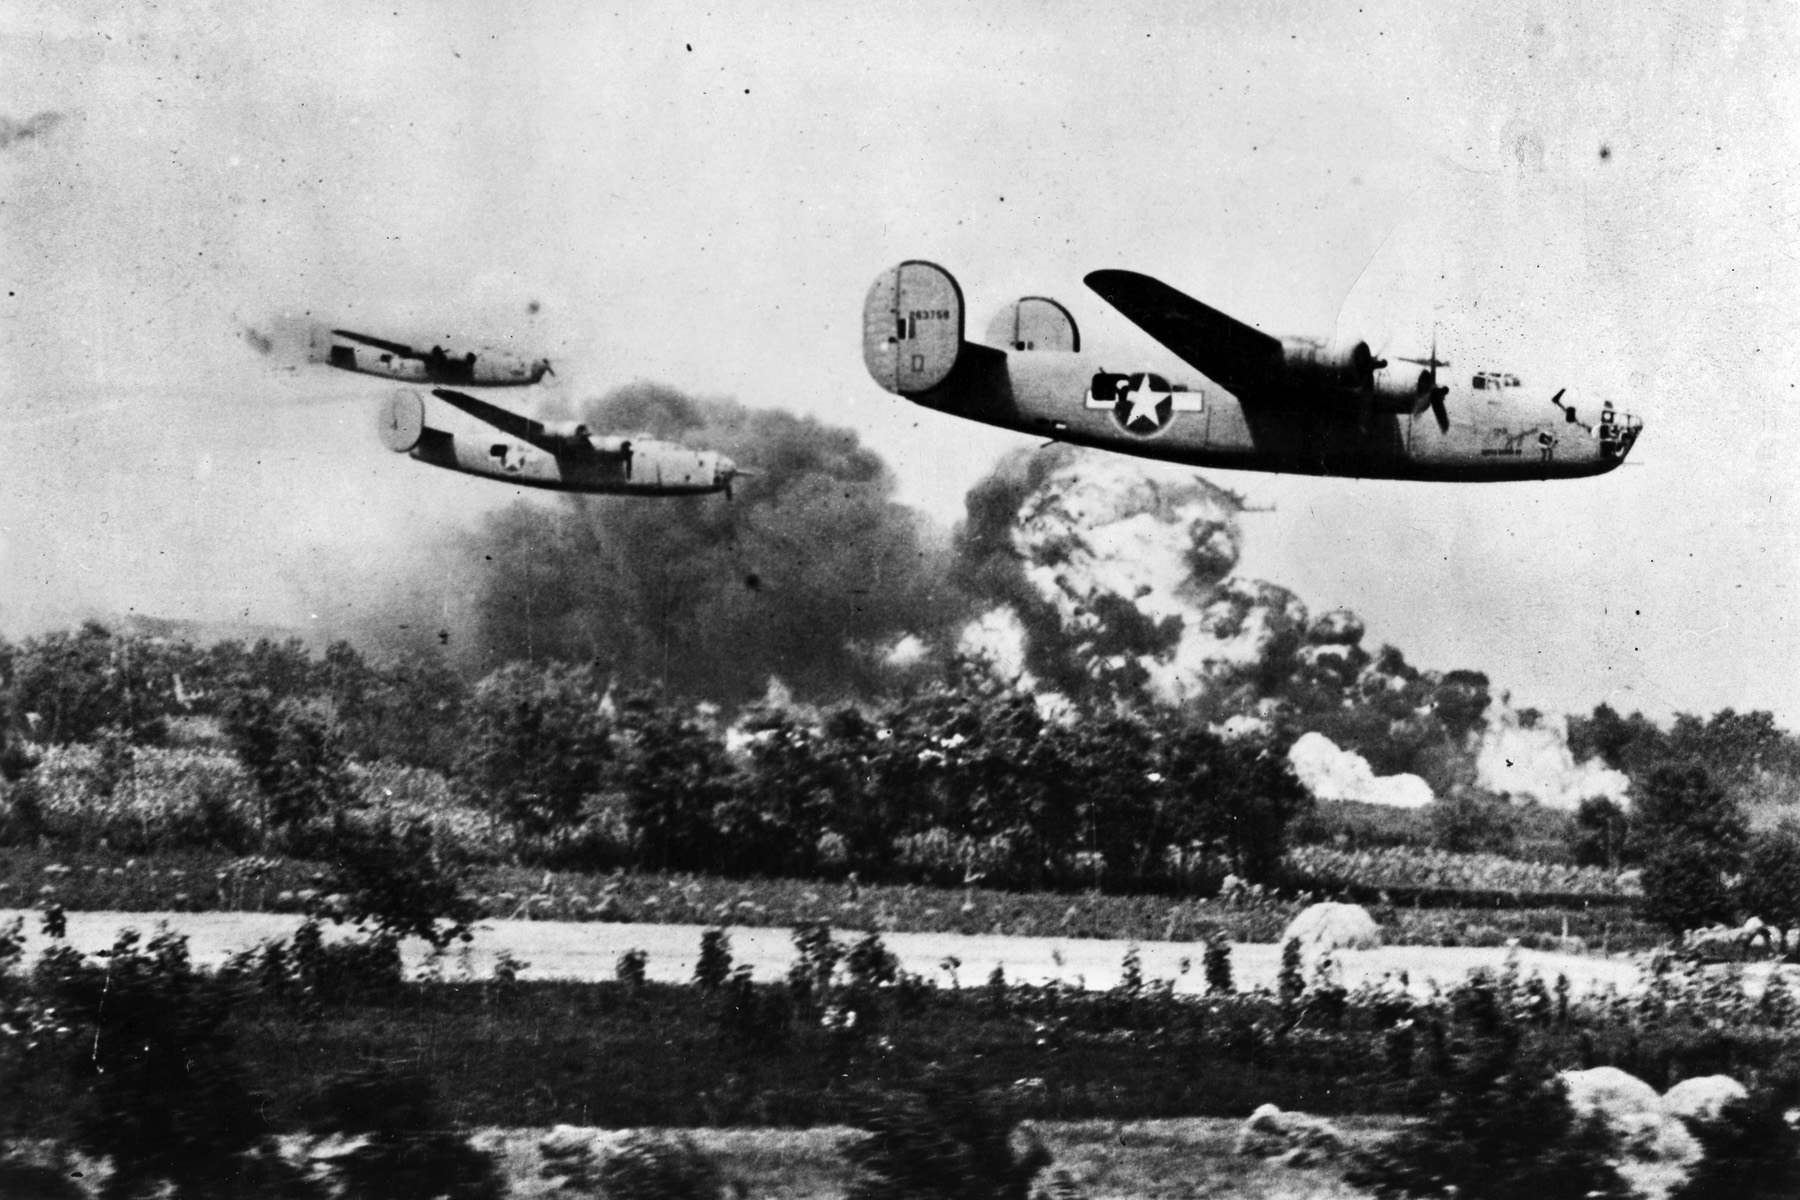 Pilots and crewmen of B-24 Liberator heavy bombers brave enemy fire and fly low toward their target during the costly Ploesti raid. The oil refineries at Ploesti were put out of commission for only a short time as a result of the raid. 